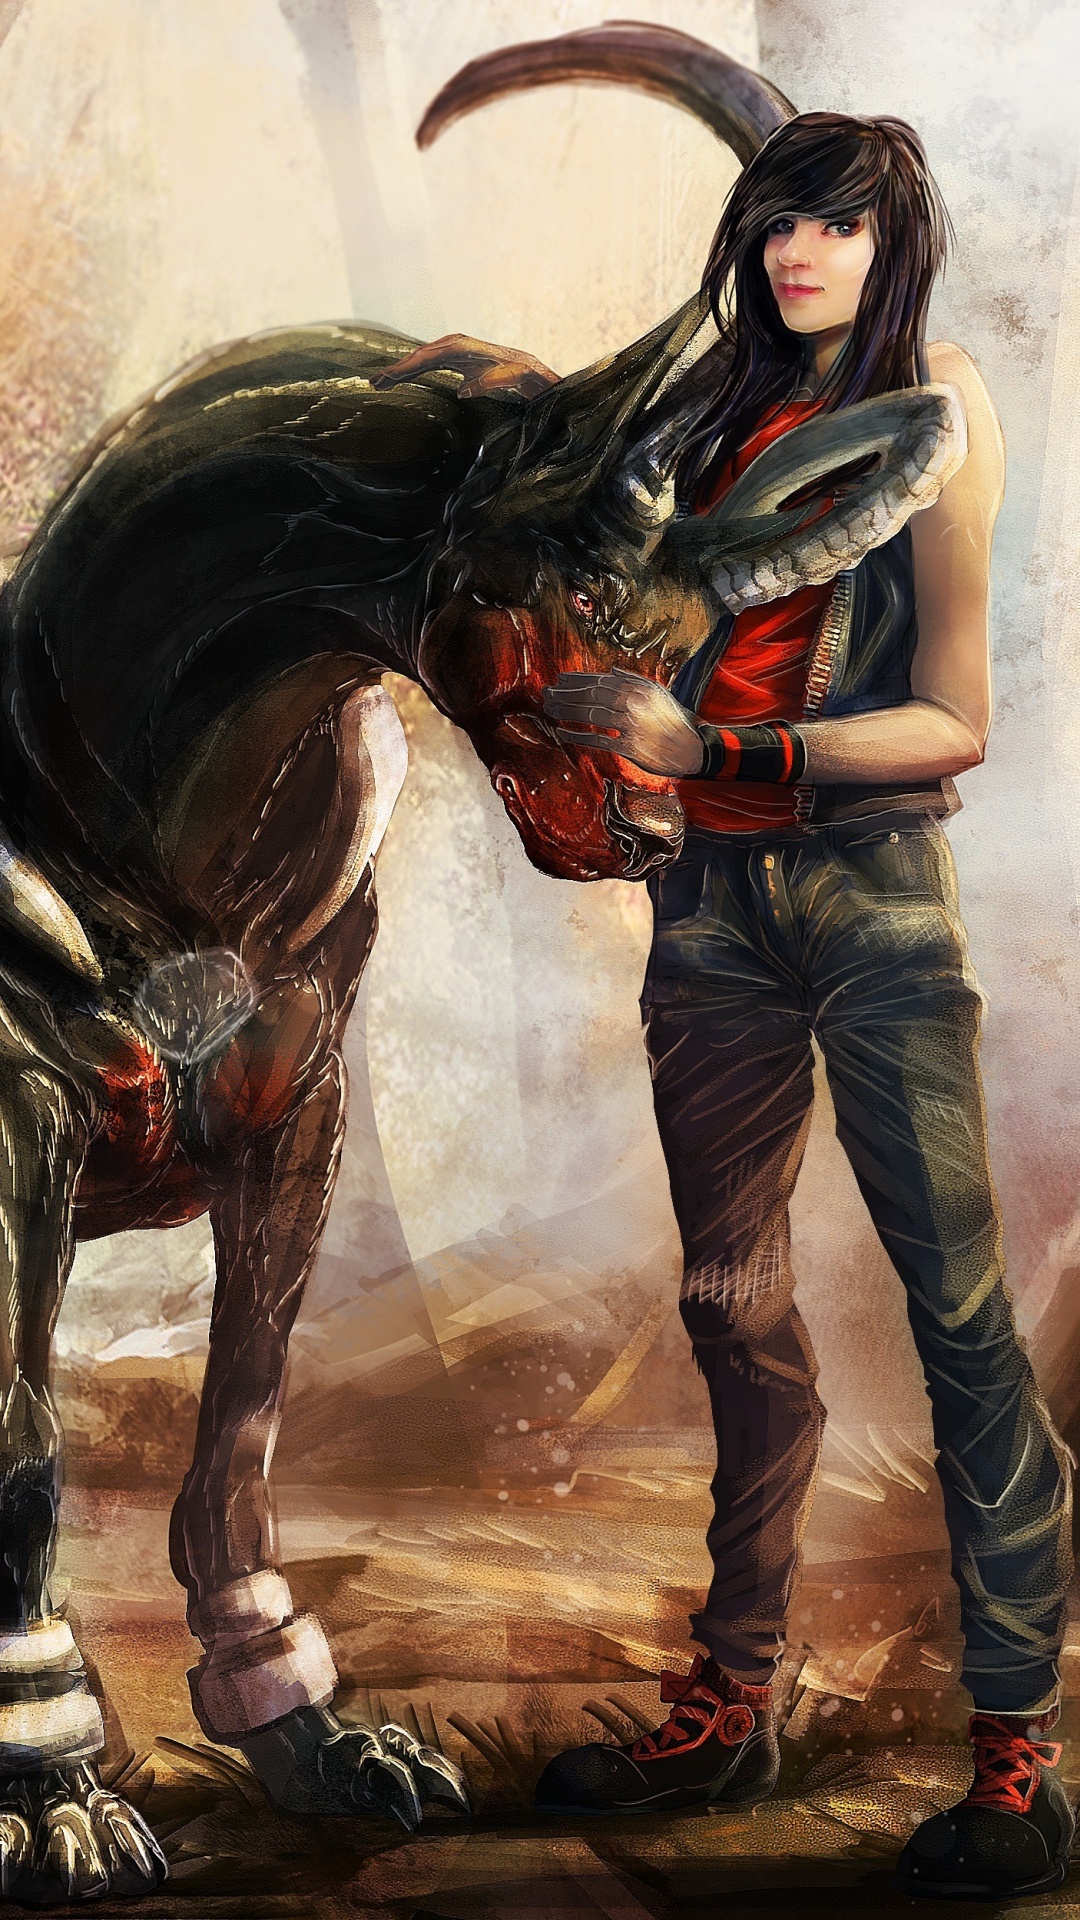 Woman in Black and Red Long Sleeve Shirt and Blue Denim Jeans Standing Beside Black Horse. Wallpaper in 1080x1920 Resolution